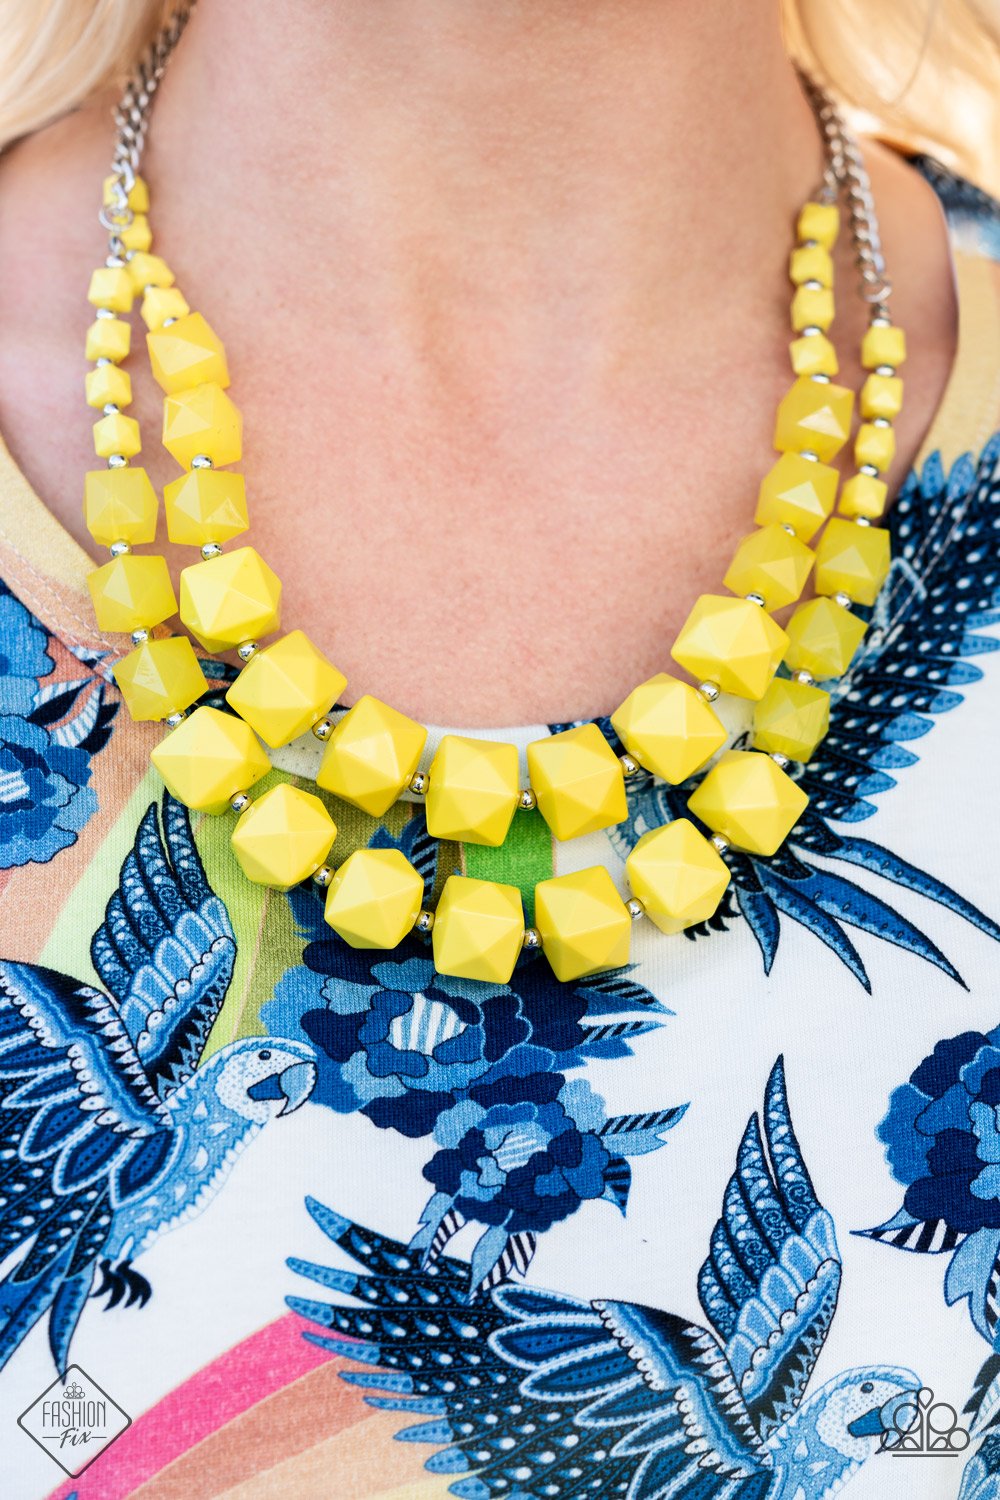 Paparazzi Accessories - Summer Excursion - Yellow Necklace